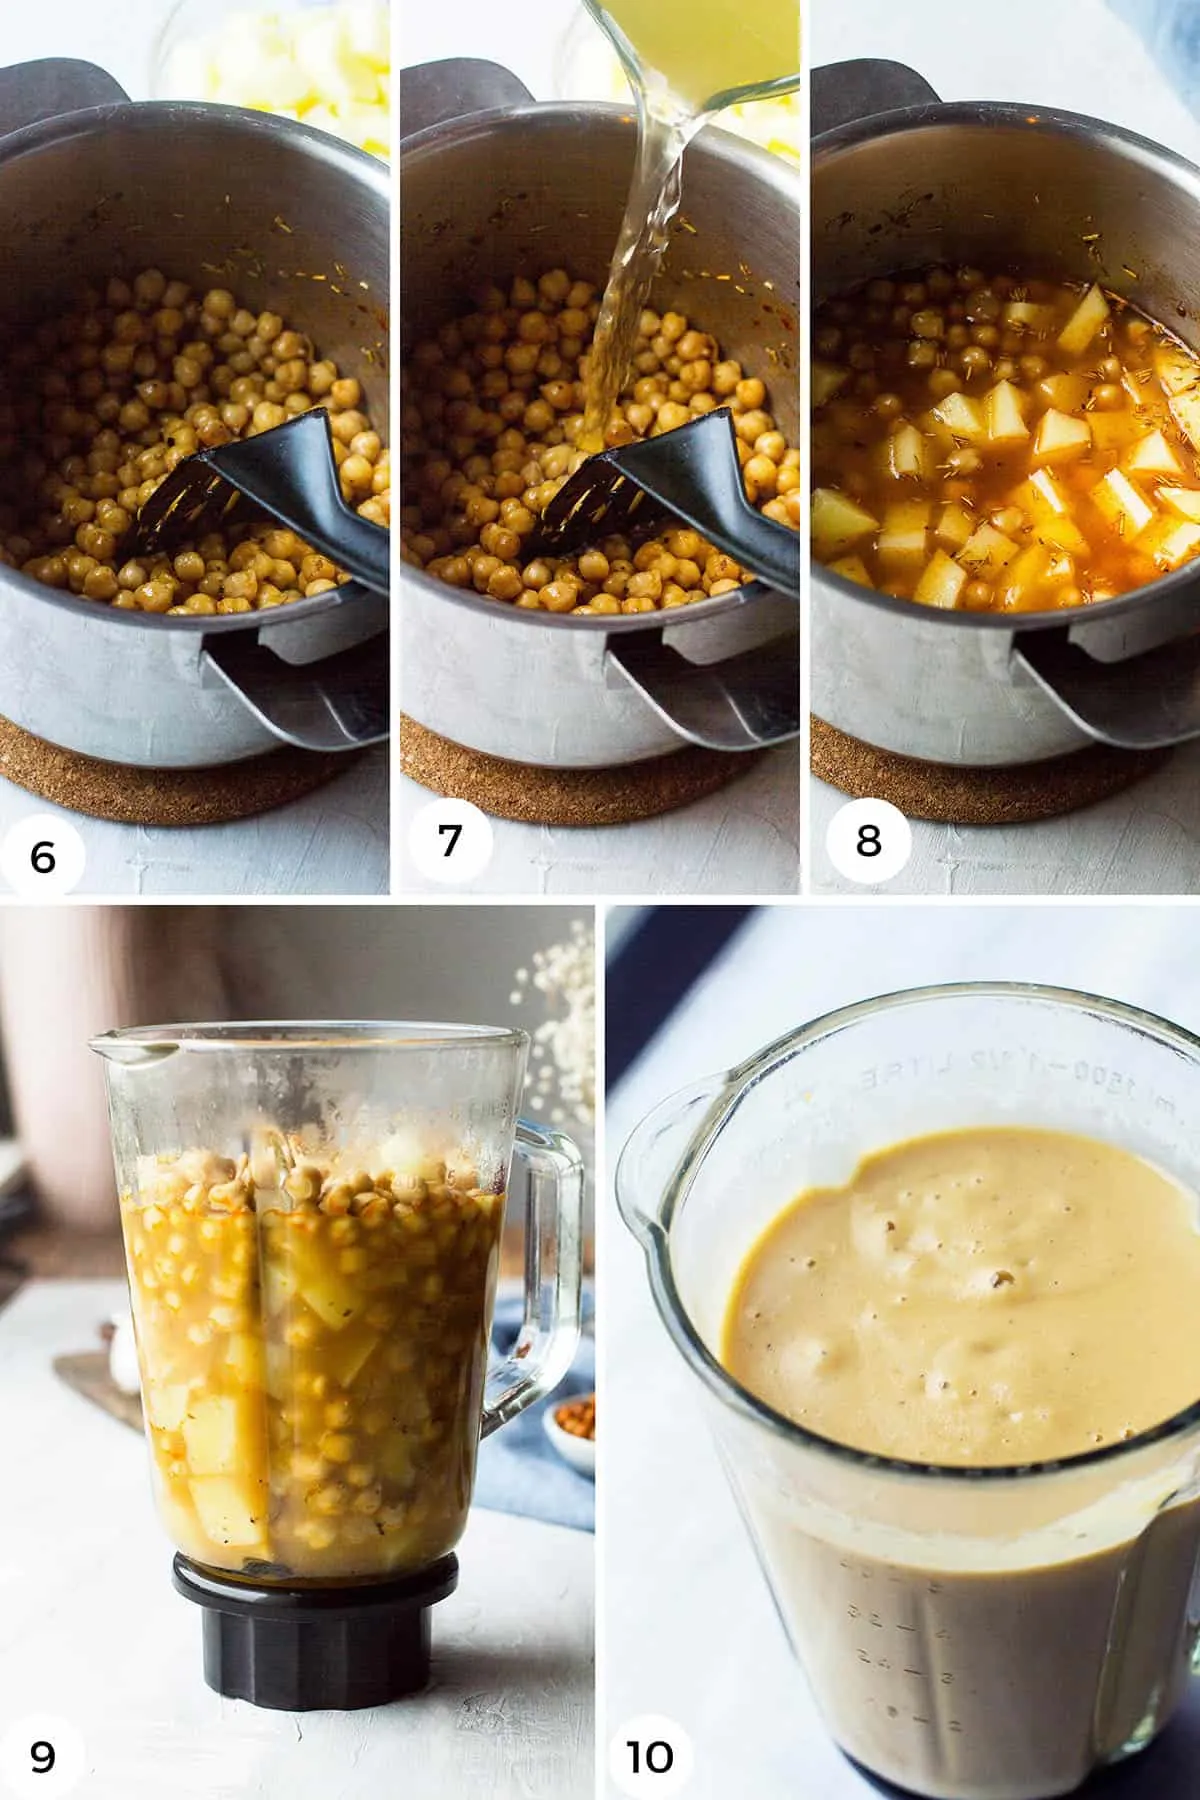 Steps to make chickpea soup.